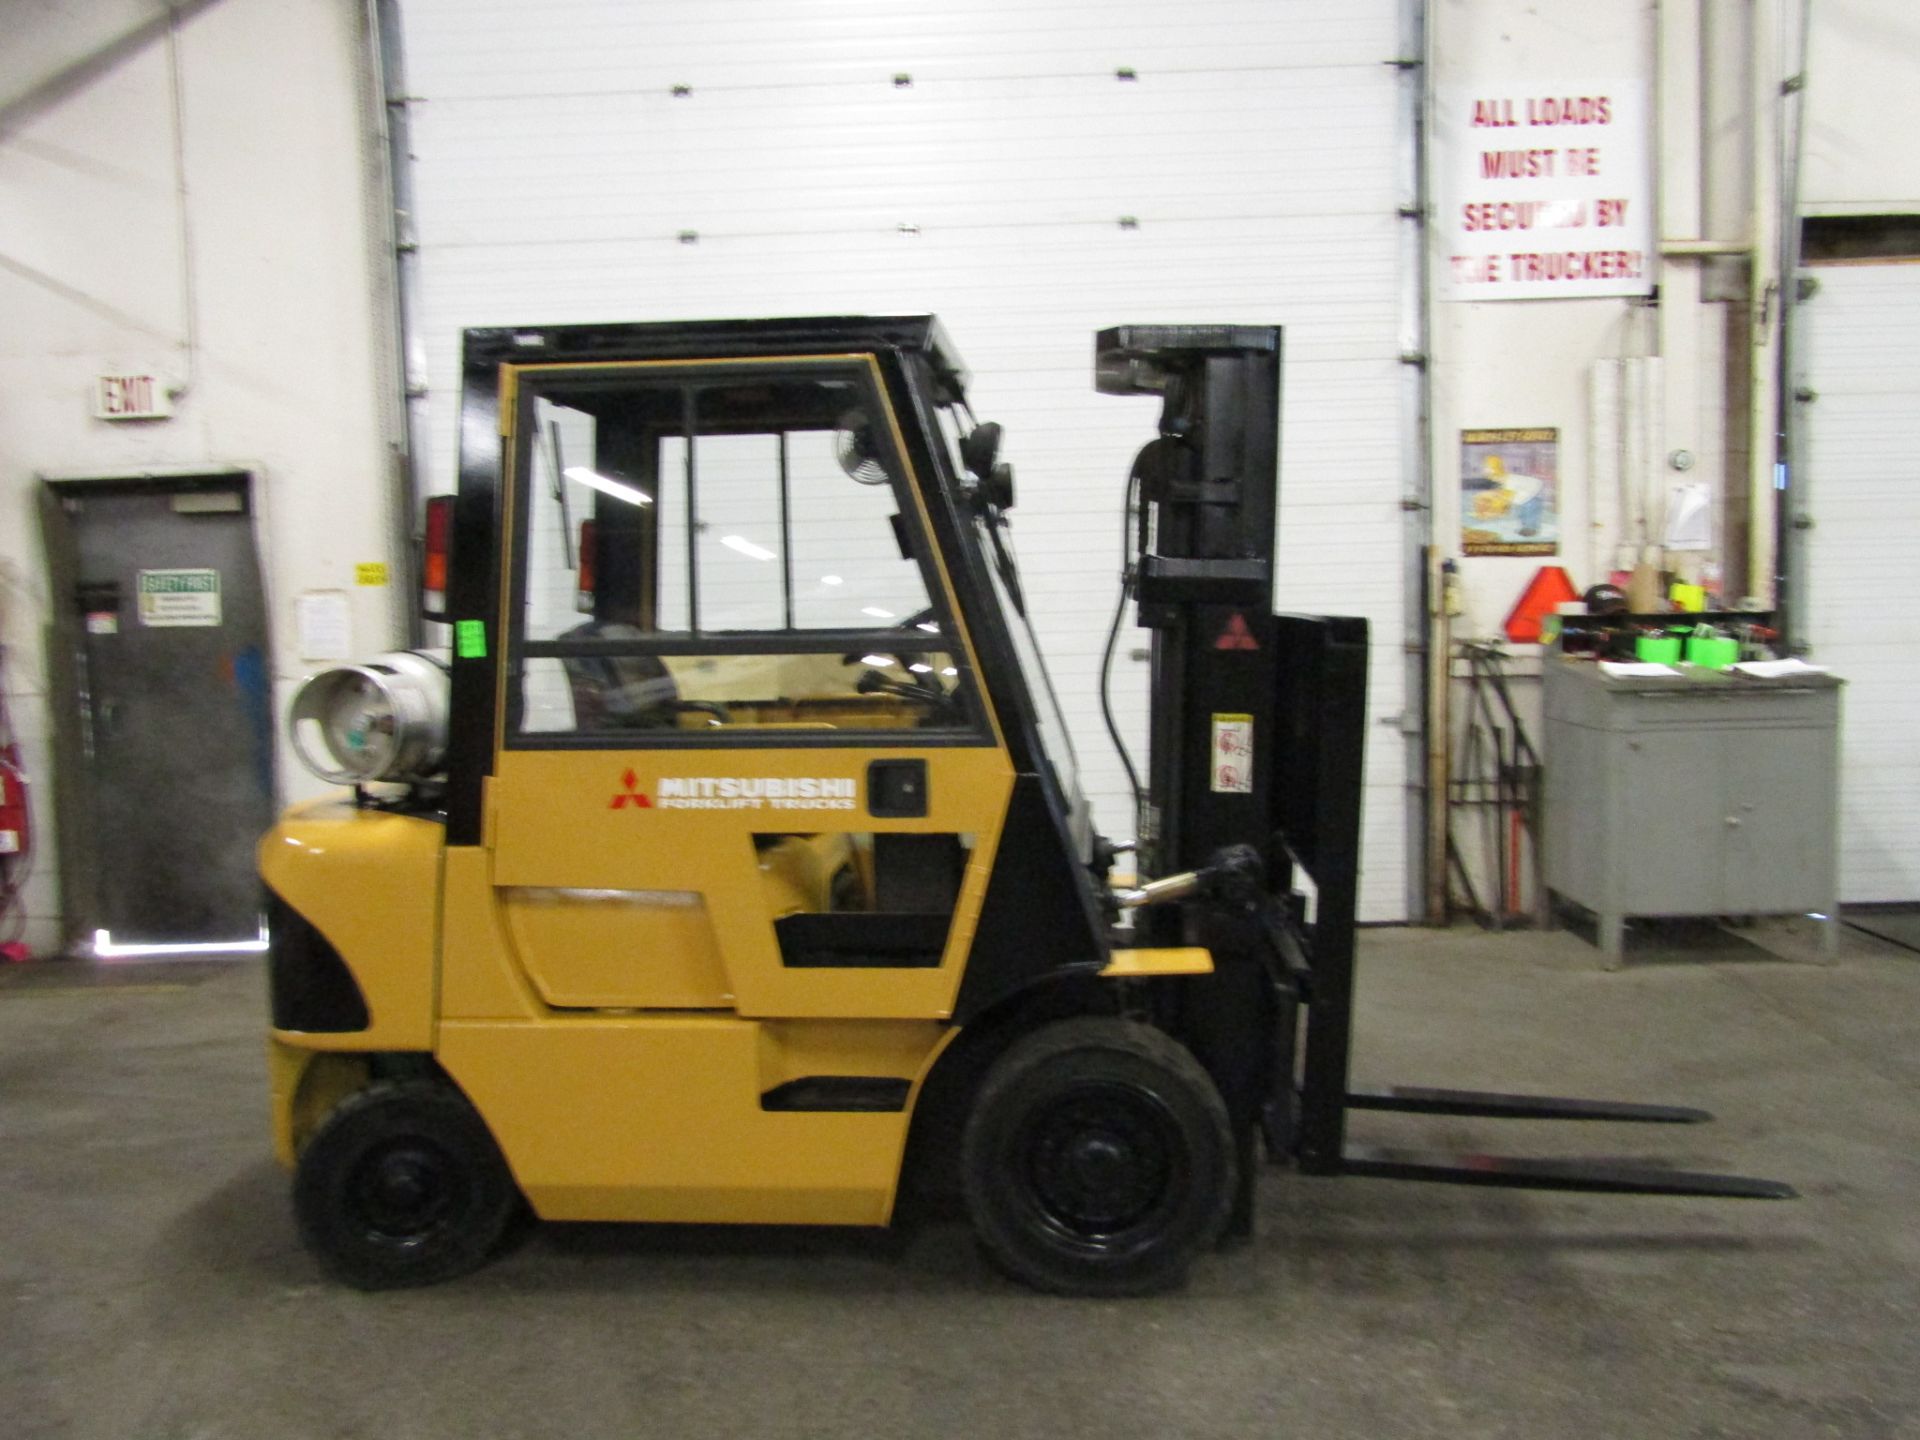 FREE CUSTOMS - Mitsubishi 5000lbs Capacity OUTDOOR Forklift with 3-stage mast and sideshift with CAB